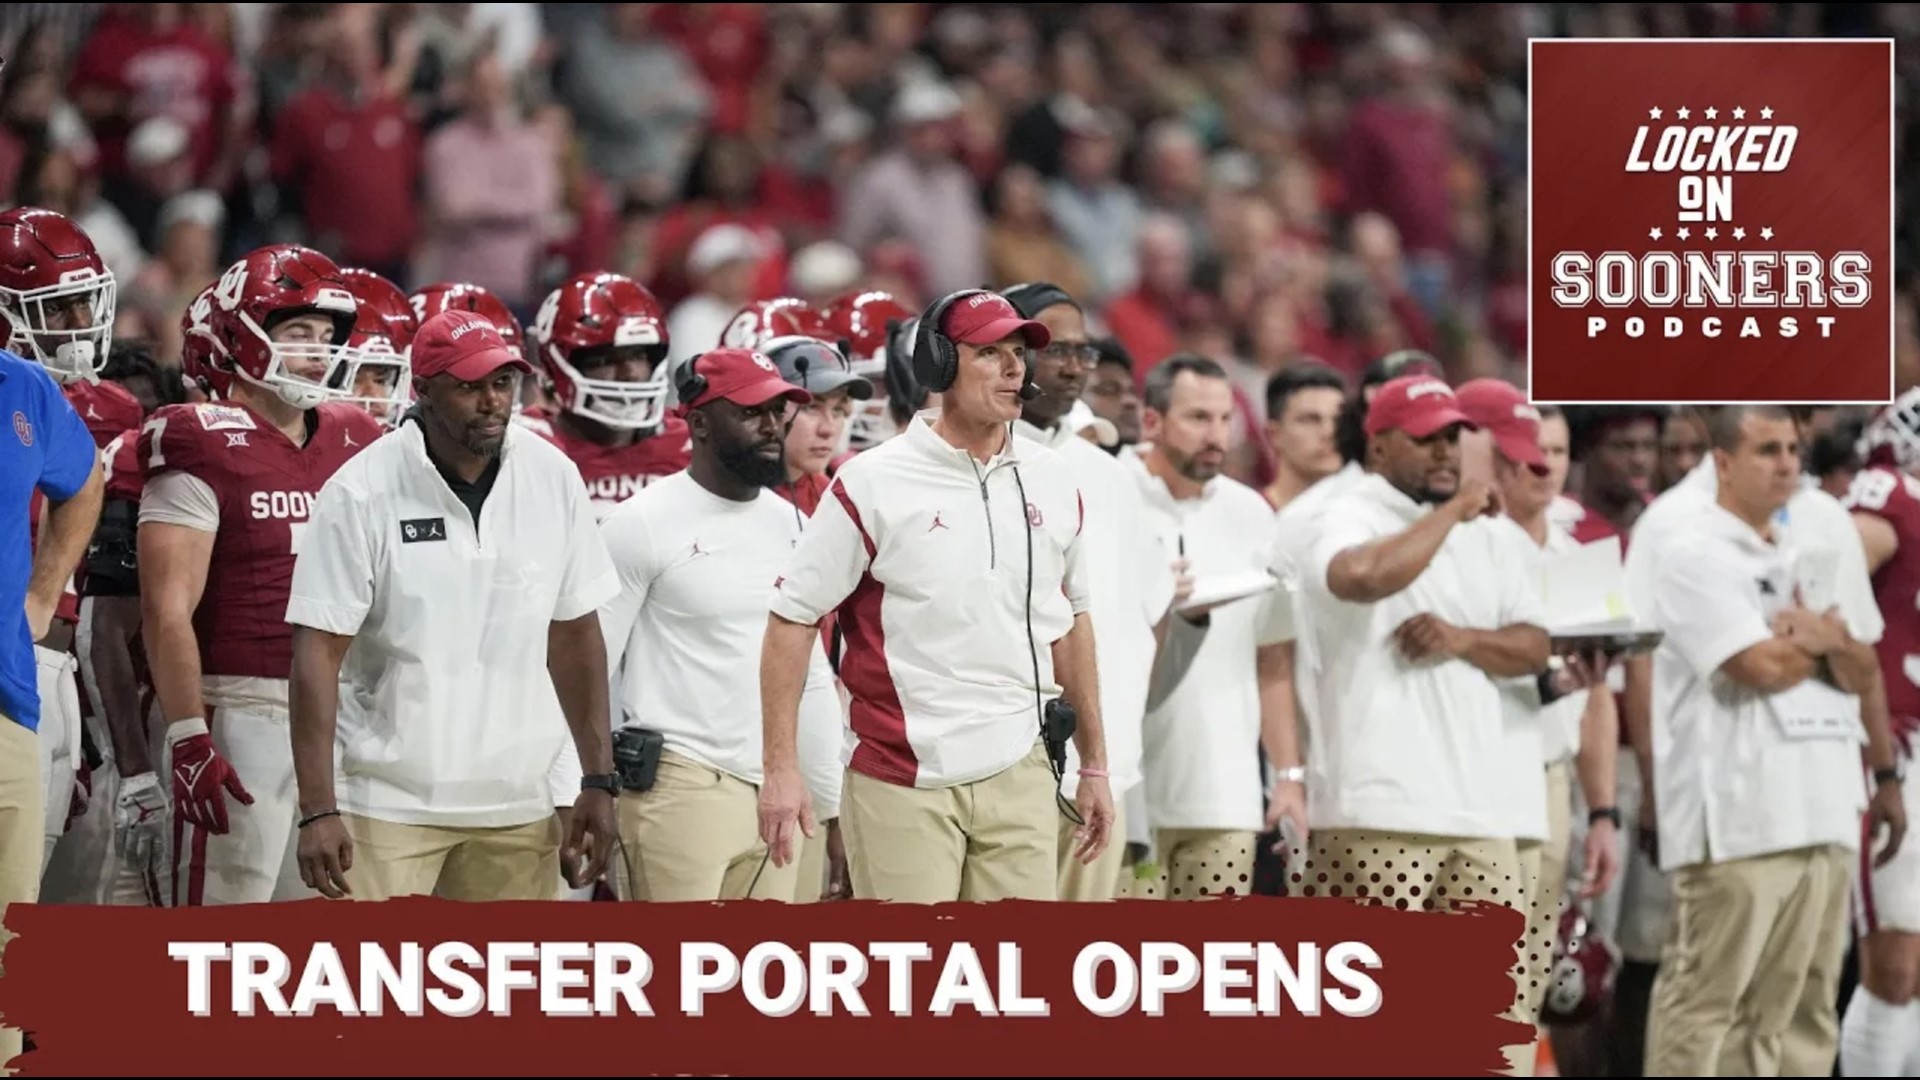 Spring transfer portal window opens on Monday. Do the Oklahoma Sooners need to address any areas this spring?